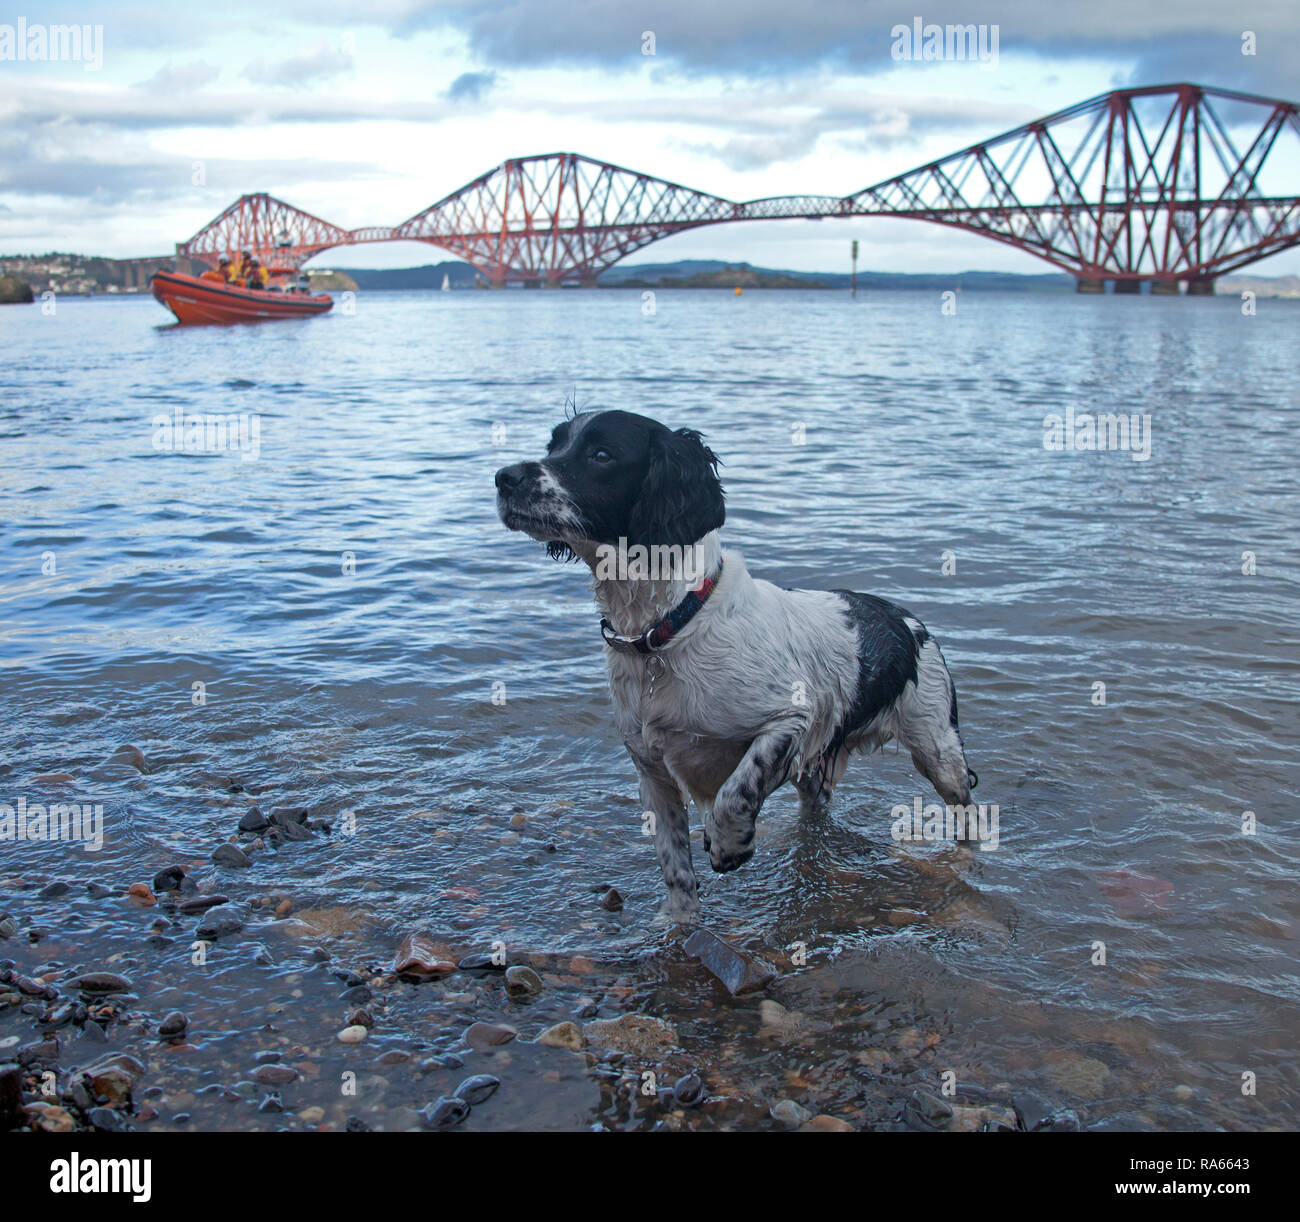 South Queensferry, Edinburgh, Scotland UK. 01 January 2019. Queensferry New Year Loony Dook, the annual dip in the Firth of Forth in the shadow of the world-famous Forth Rail Bridge. Takes place on the third day of the Edinburgh Hogmany New Year celebrations. Maximum capacity crowd and even Hendrix the spaniel joined in once the other participants left the water Credit: Arch White/Alamy Live News Stock Photo